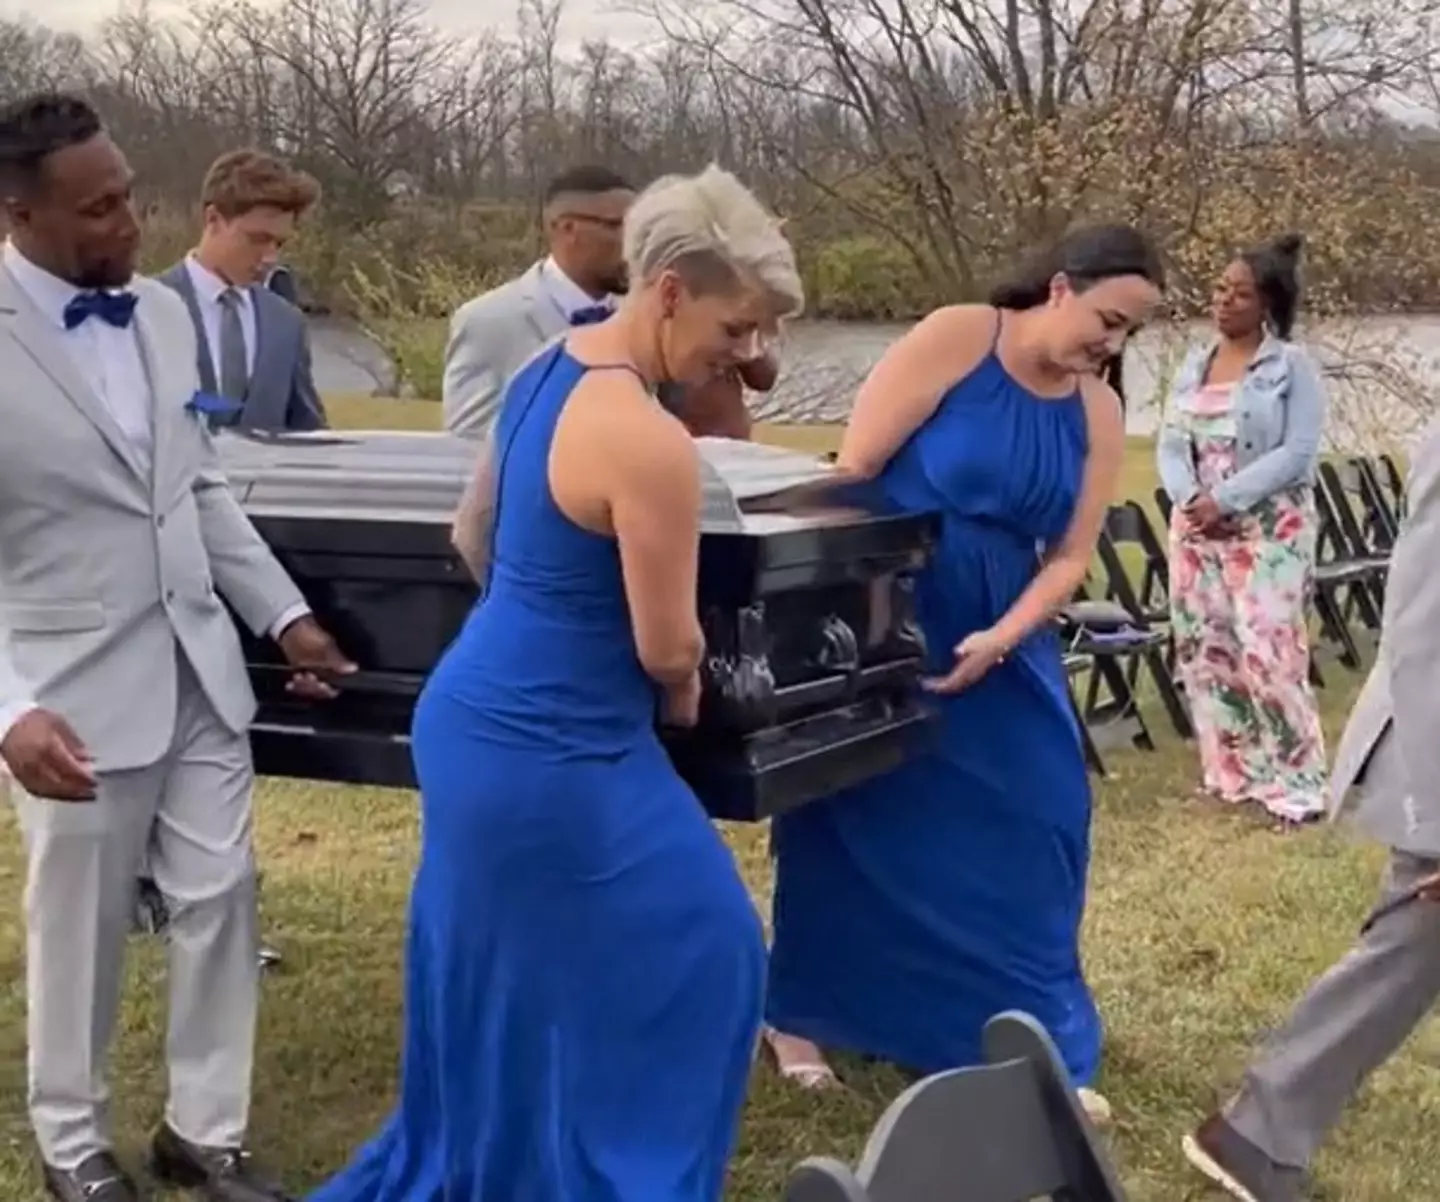 Nothing says 'happiest day of my life' like showing up in a coffin.